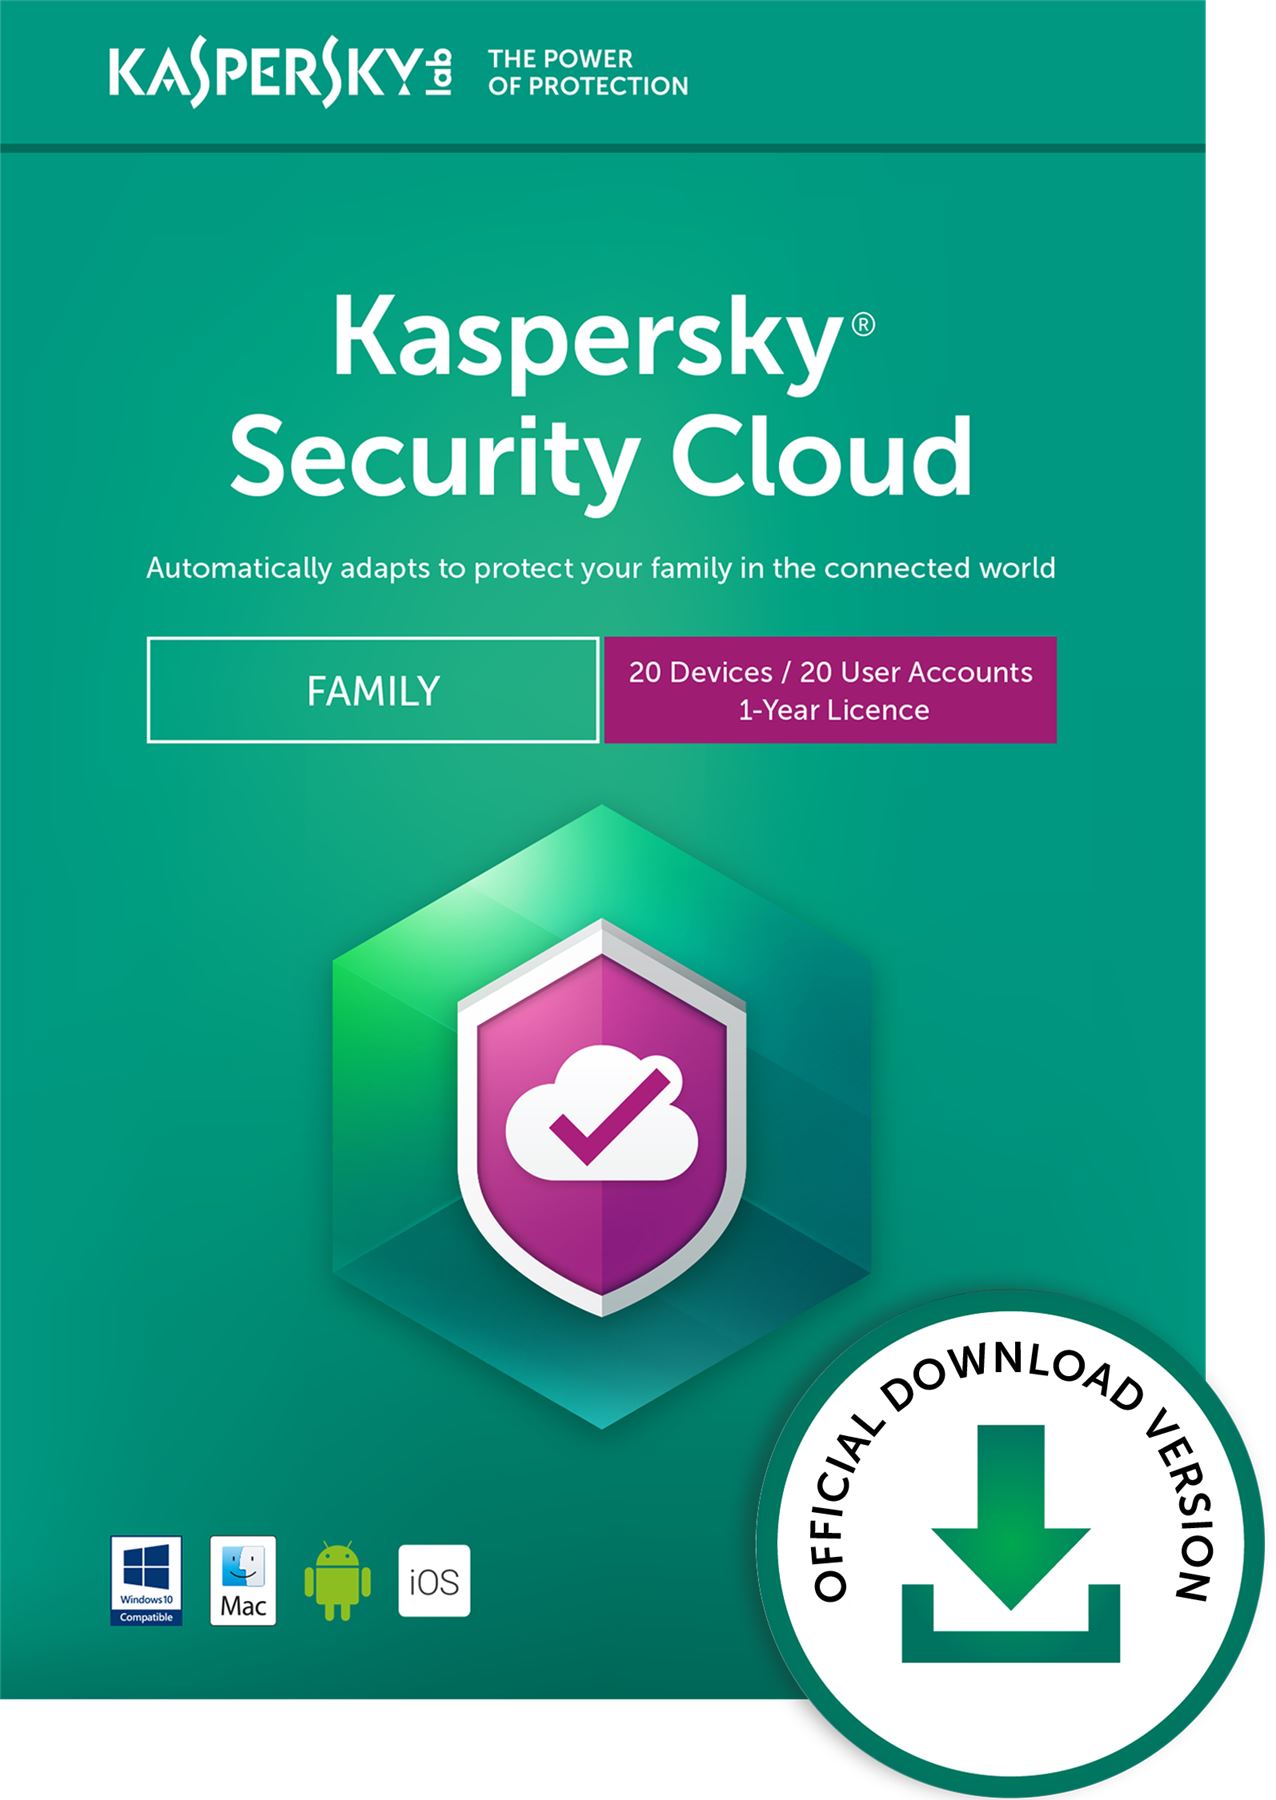 Kaspersky Security Cloud - The Global Review